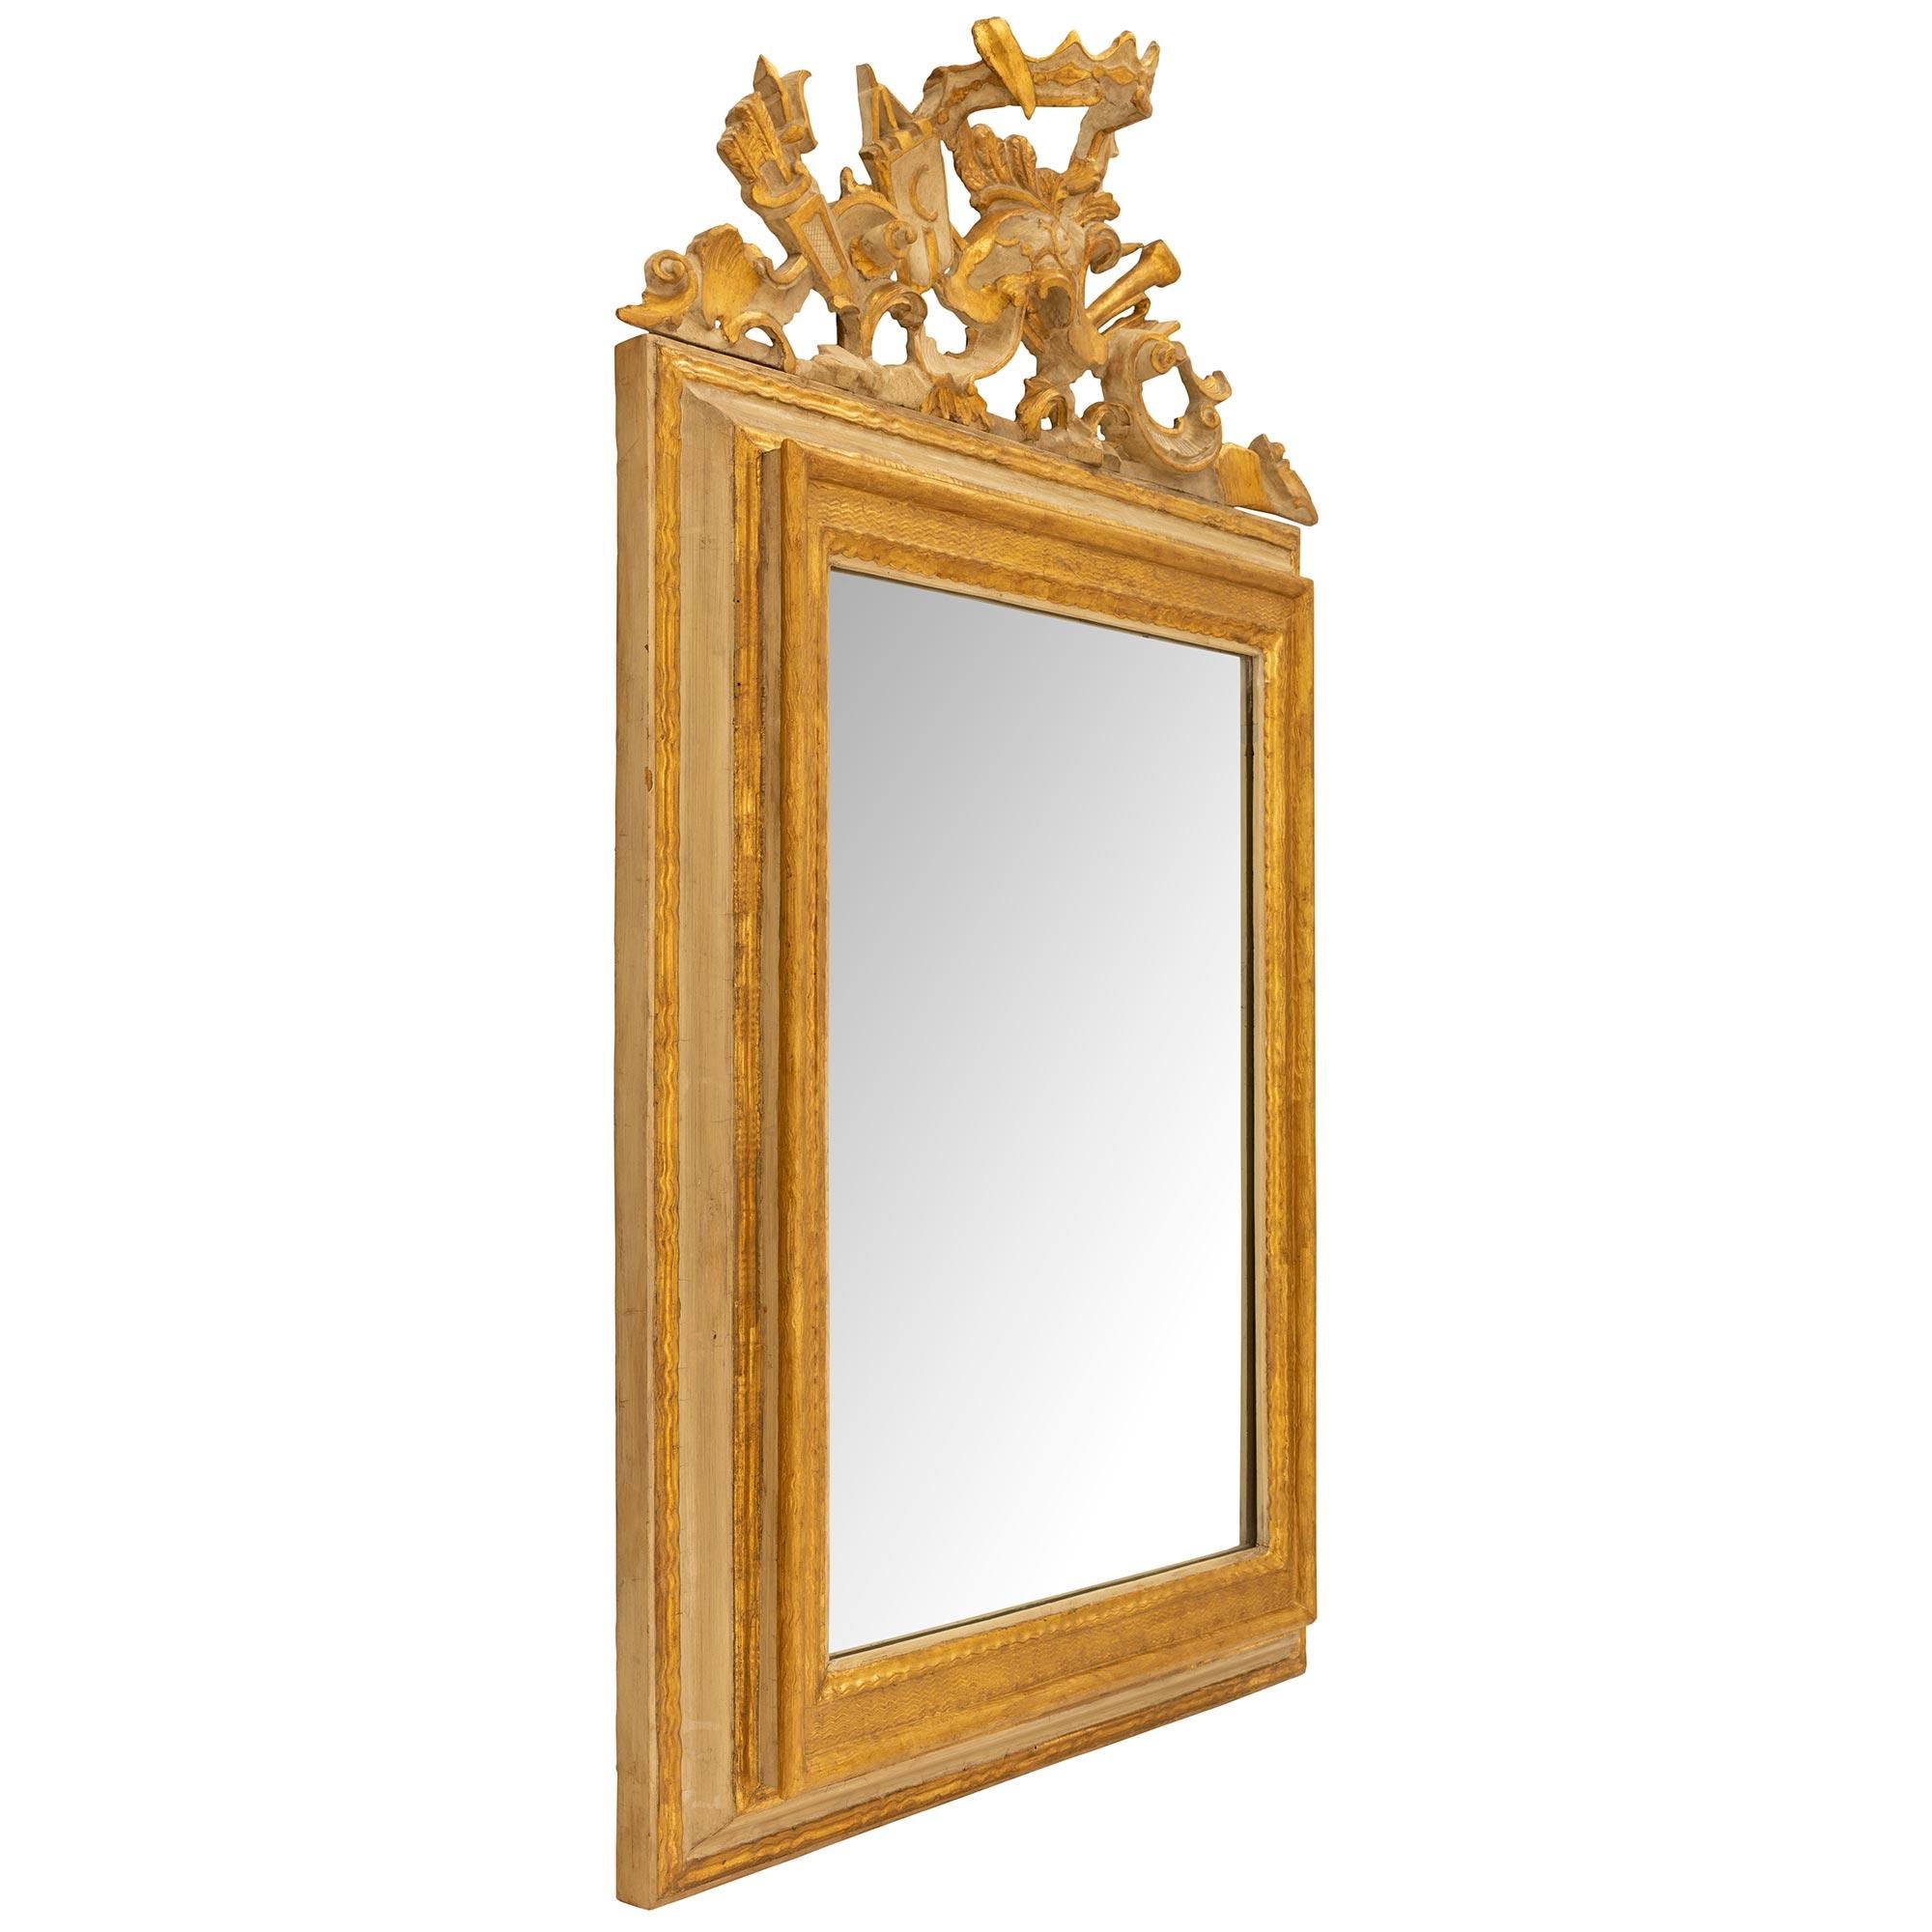 A striking Italian 19th century Louis XIV st. patinated and gilt mirror. This mirror has a mottled frame with gilt borders and fitted with the original mirror plate. At the pierced top crown are patinated festive designs with gilt borders of